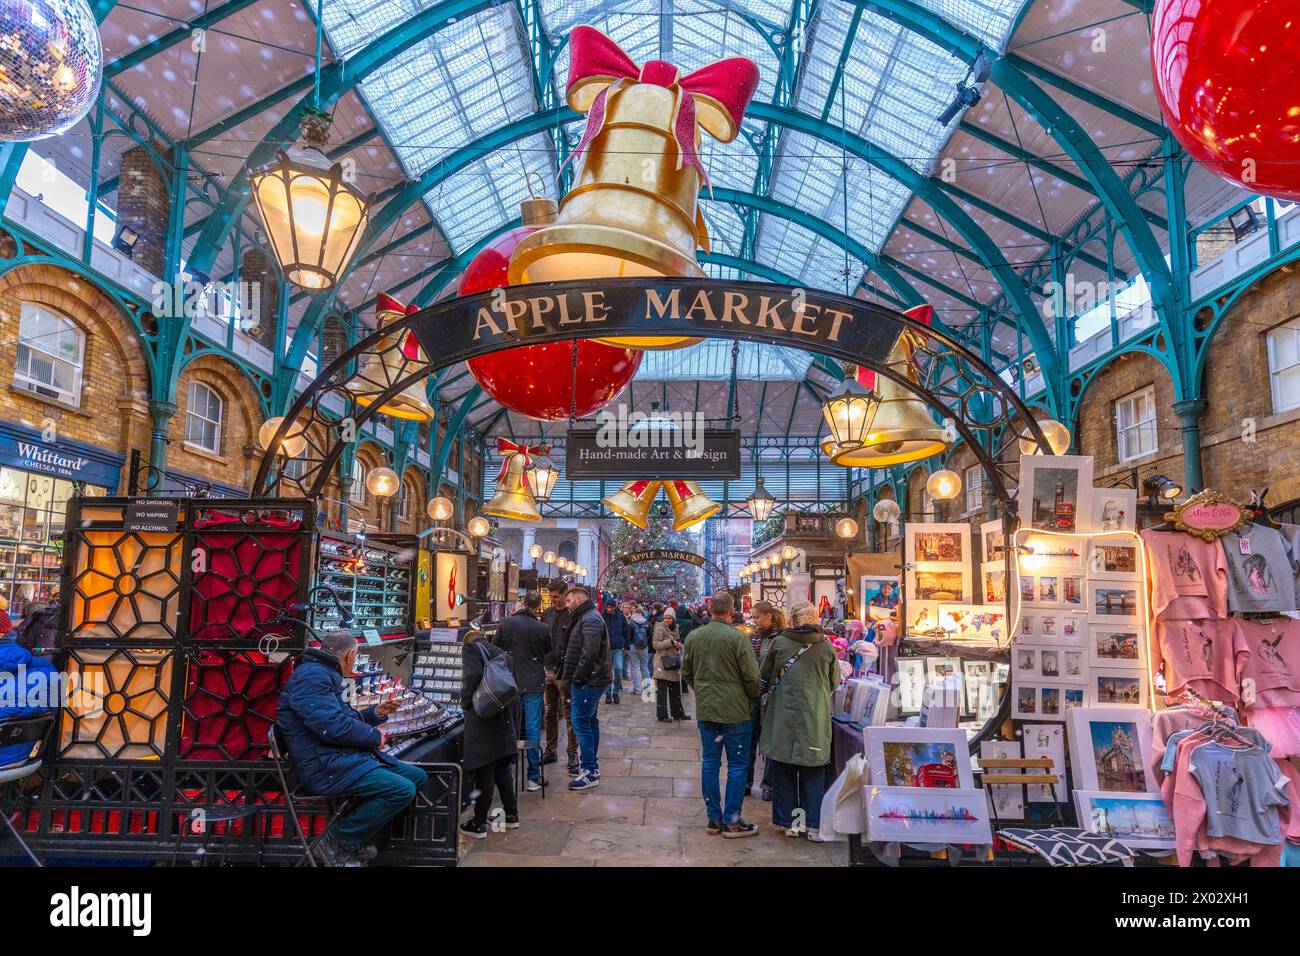 View of Christmas decorations in the Apple Market, Covent Garden, London, England, United Kingdom, Europe Stock Photo